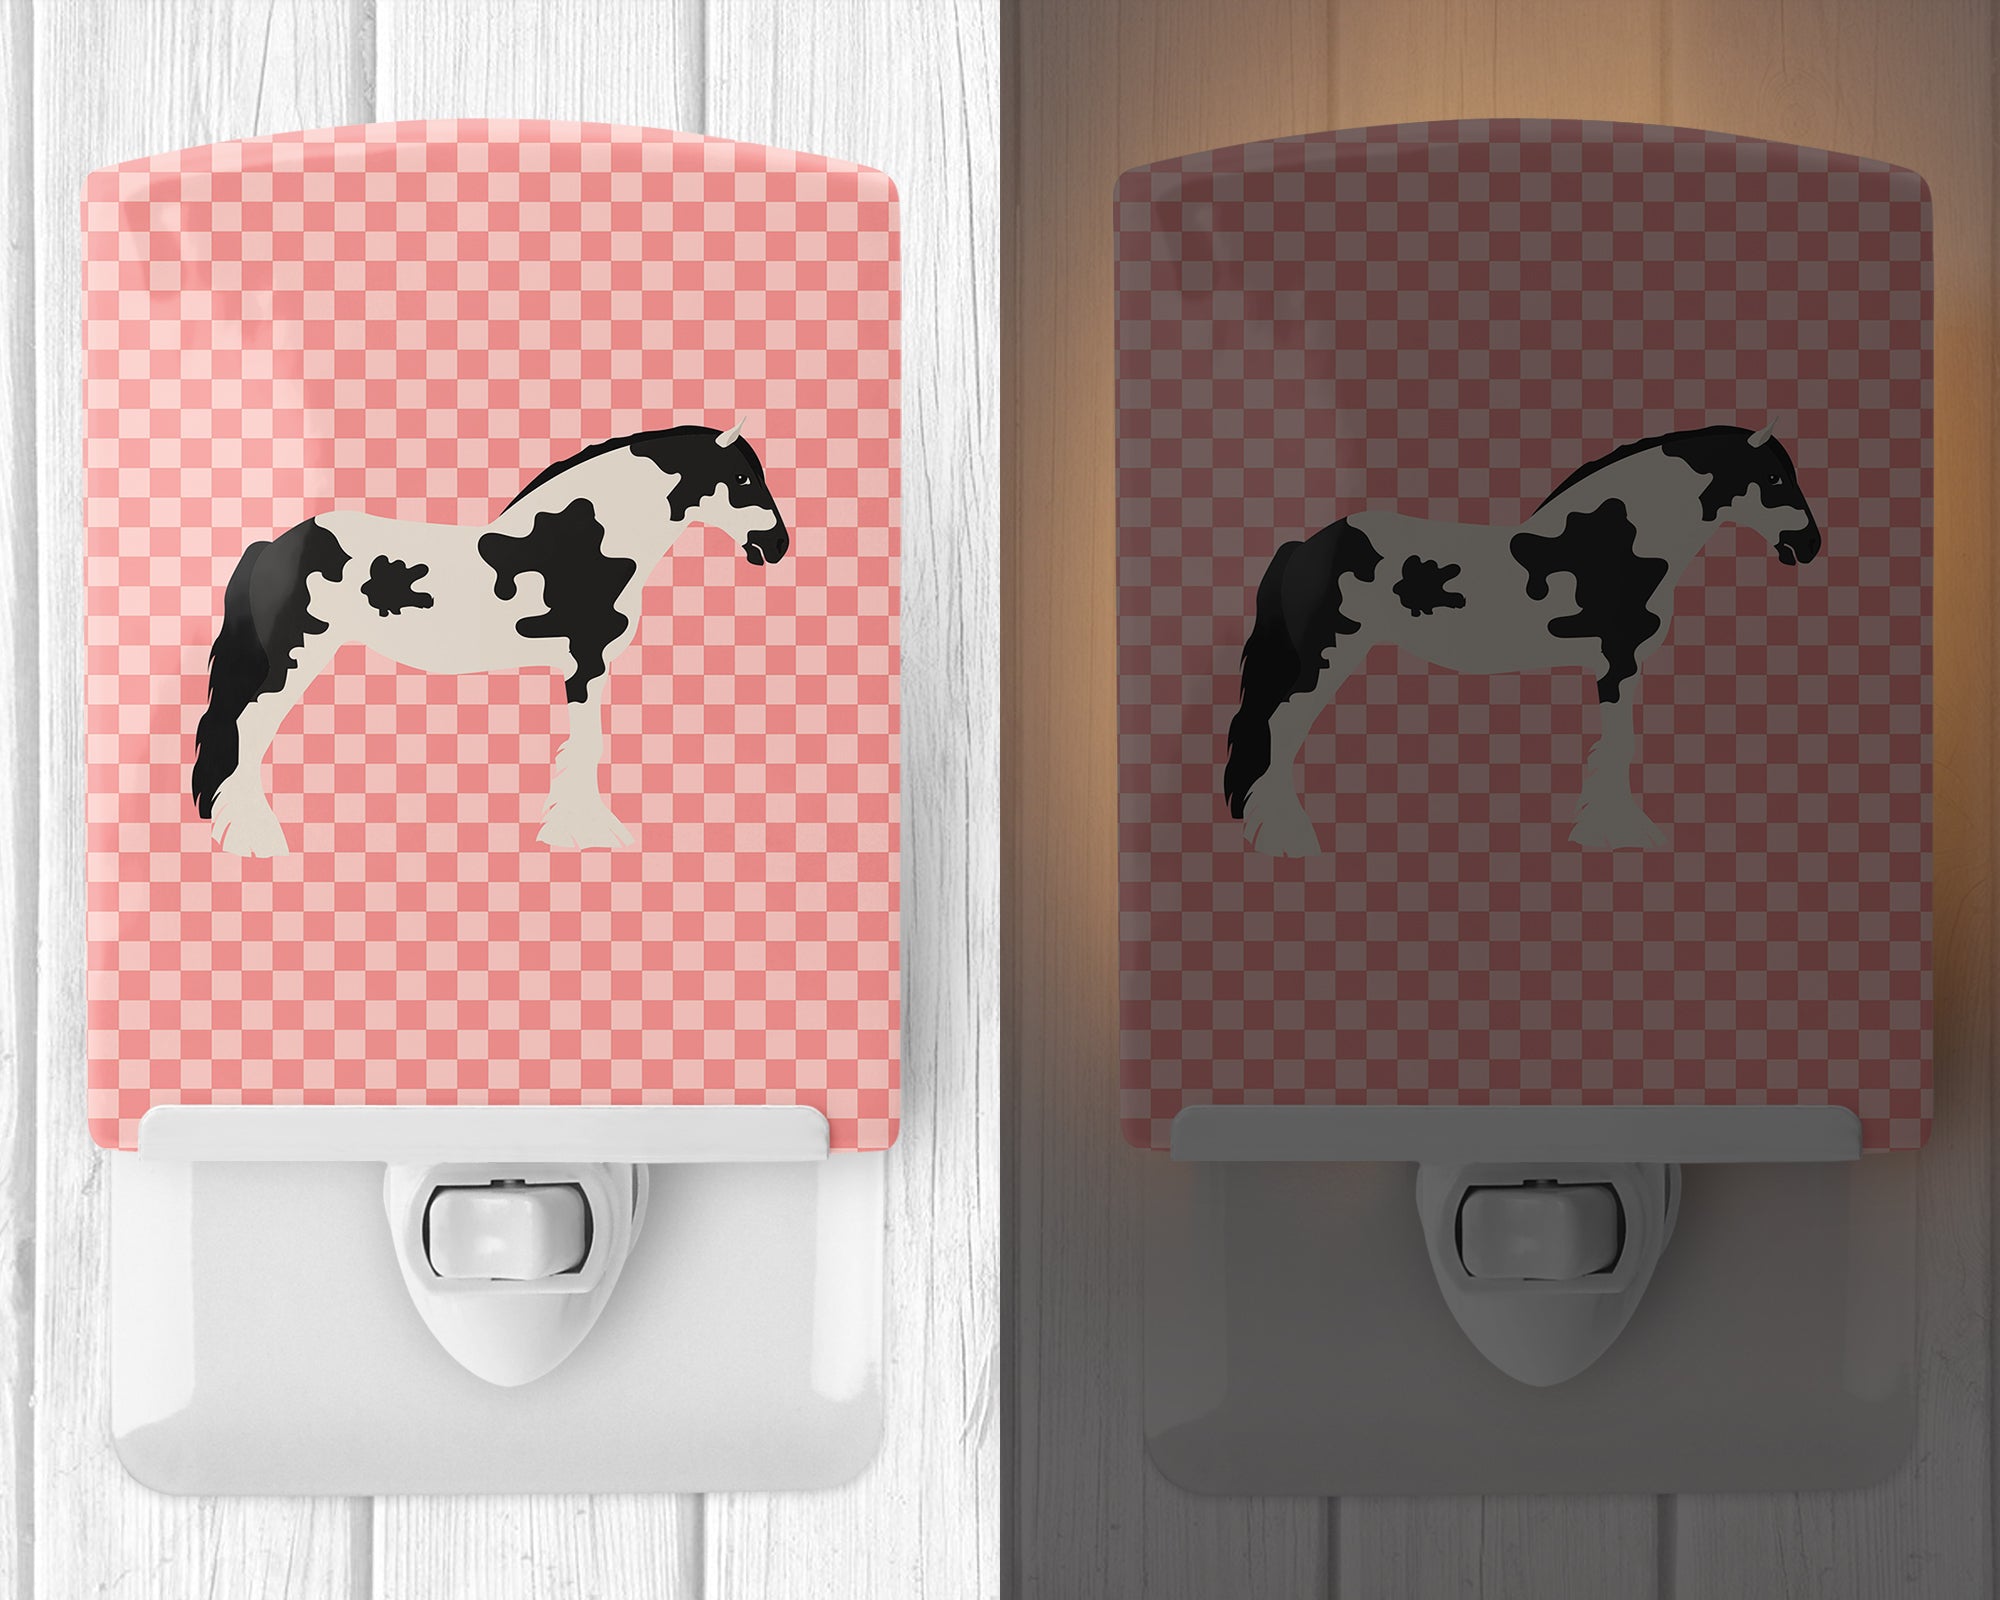 Cyldesdale Horse Pink Check Ceramic Night Light BB7912CNL - the-store.com